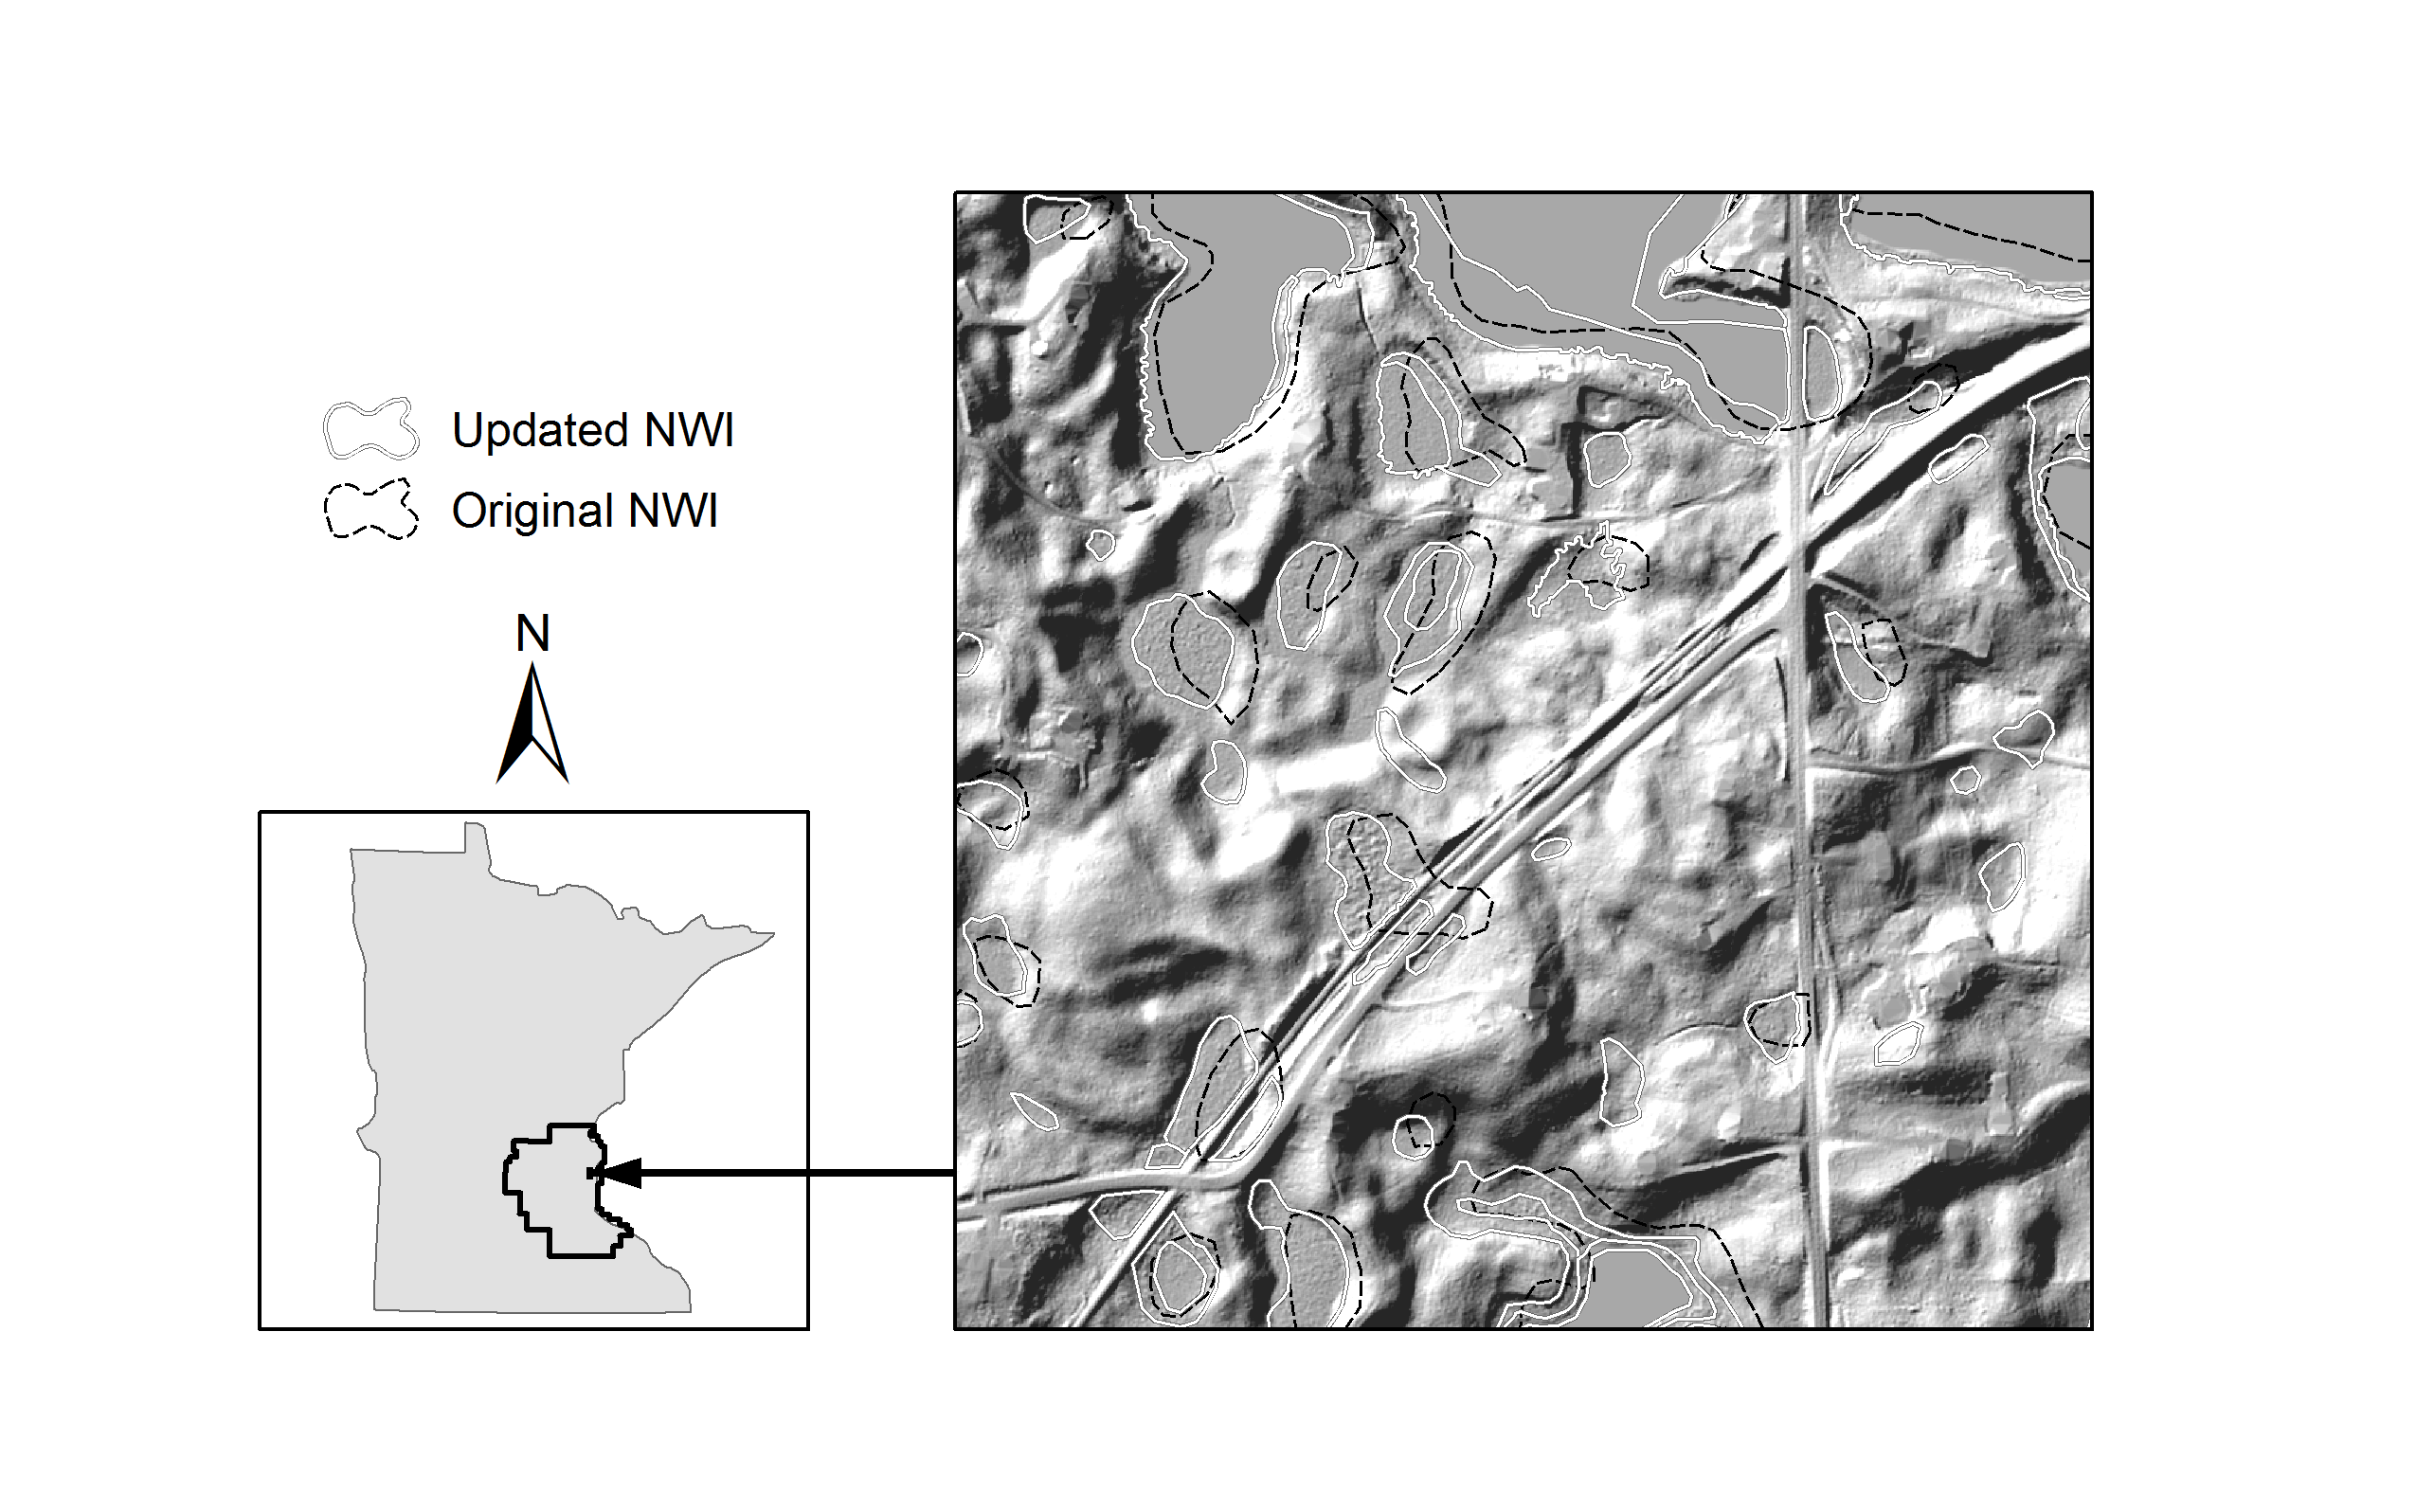 (Top) Project area map with a comparison of the original NWI to the updated Minnesota NWI on a shaded relief map derived from lidar. The Canadian National Railroad runs from the bottom left to the upper right of the image map; intersecting lines are road crossings. The black dashed lines indicate that the original NWI inaccurately mapped wetlands as crossing over railroads. The locations of the new wetland polygons (solid gray lines) more accurately conform to the landscape.